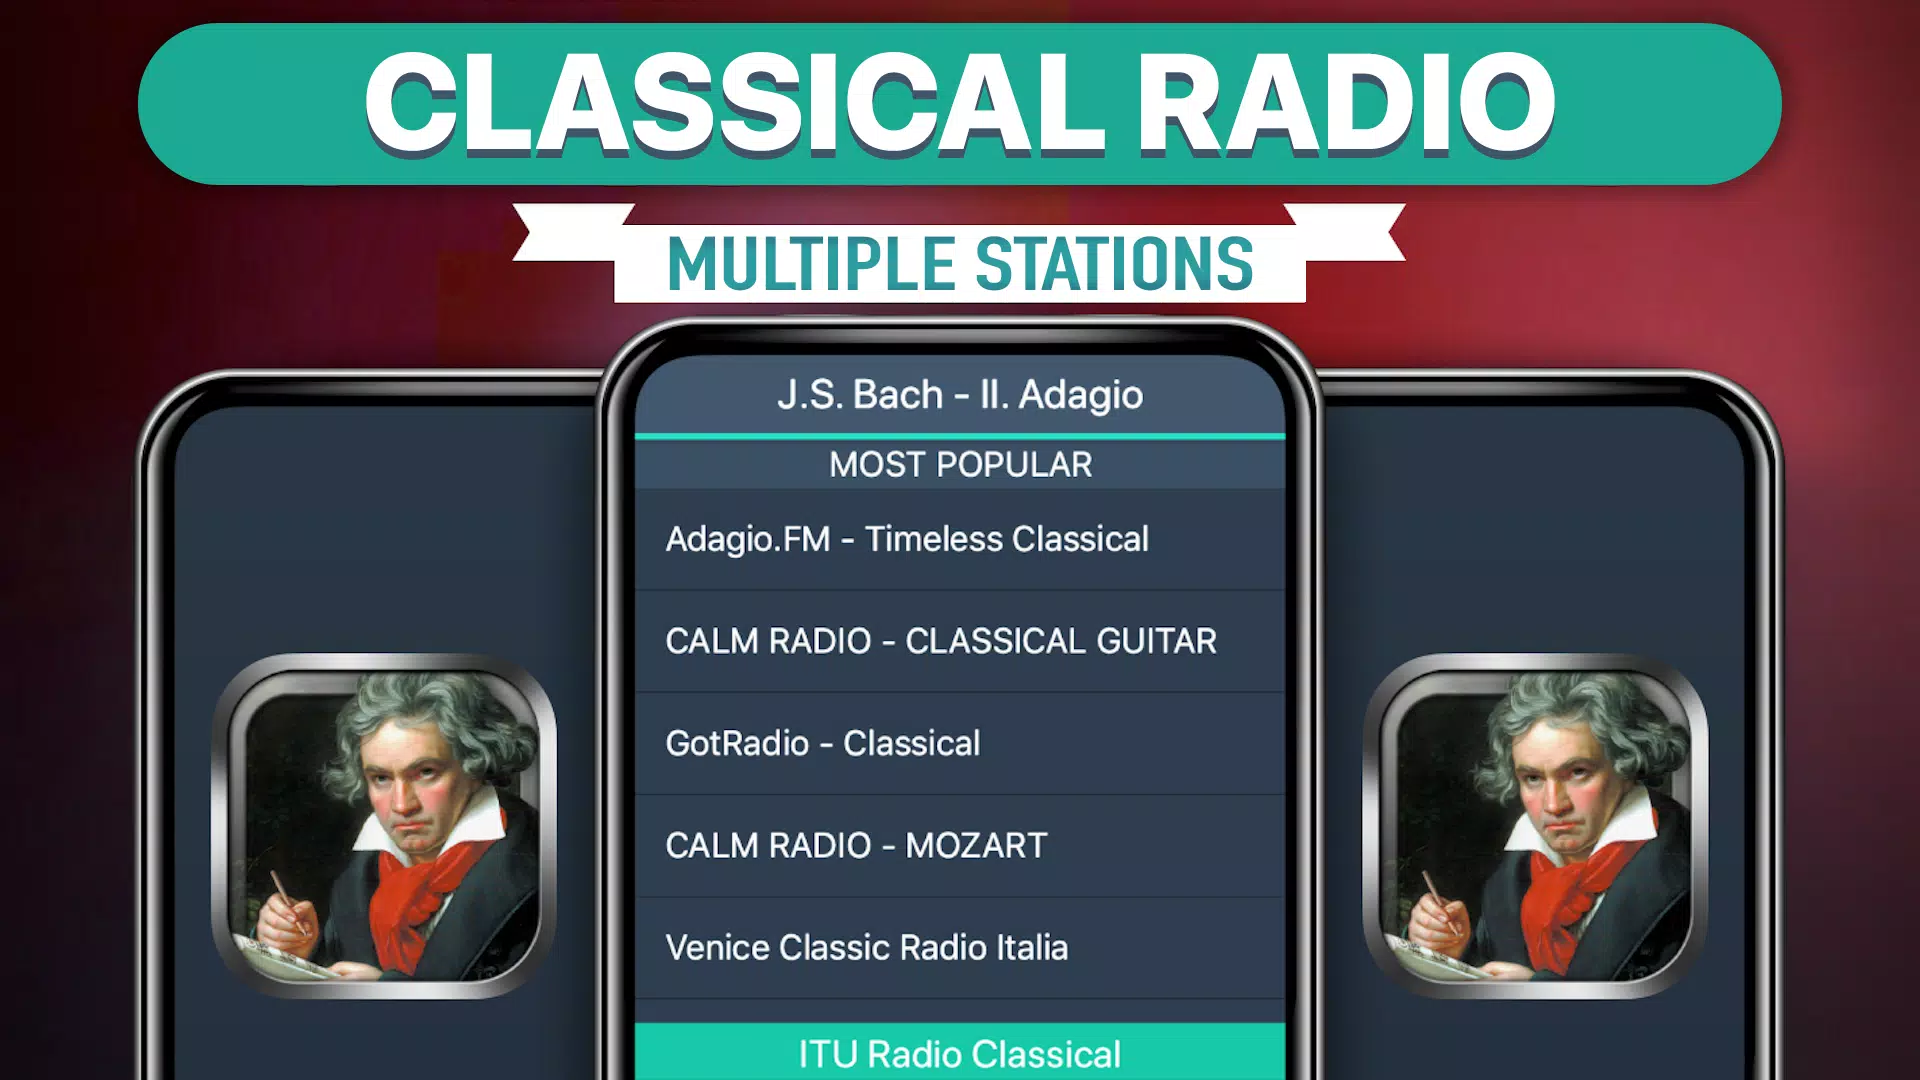 Rádio Clássica for Android - APK Download